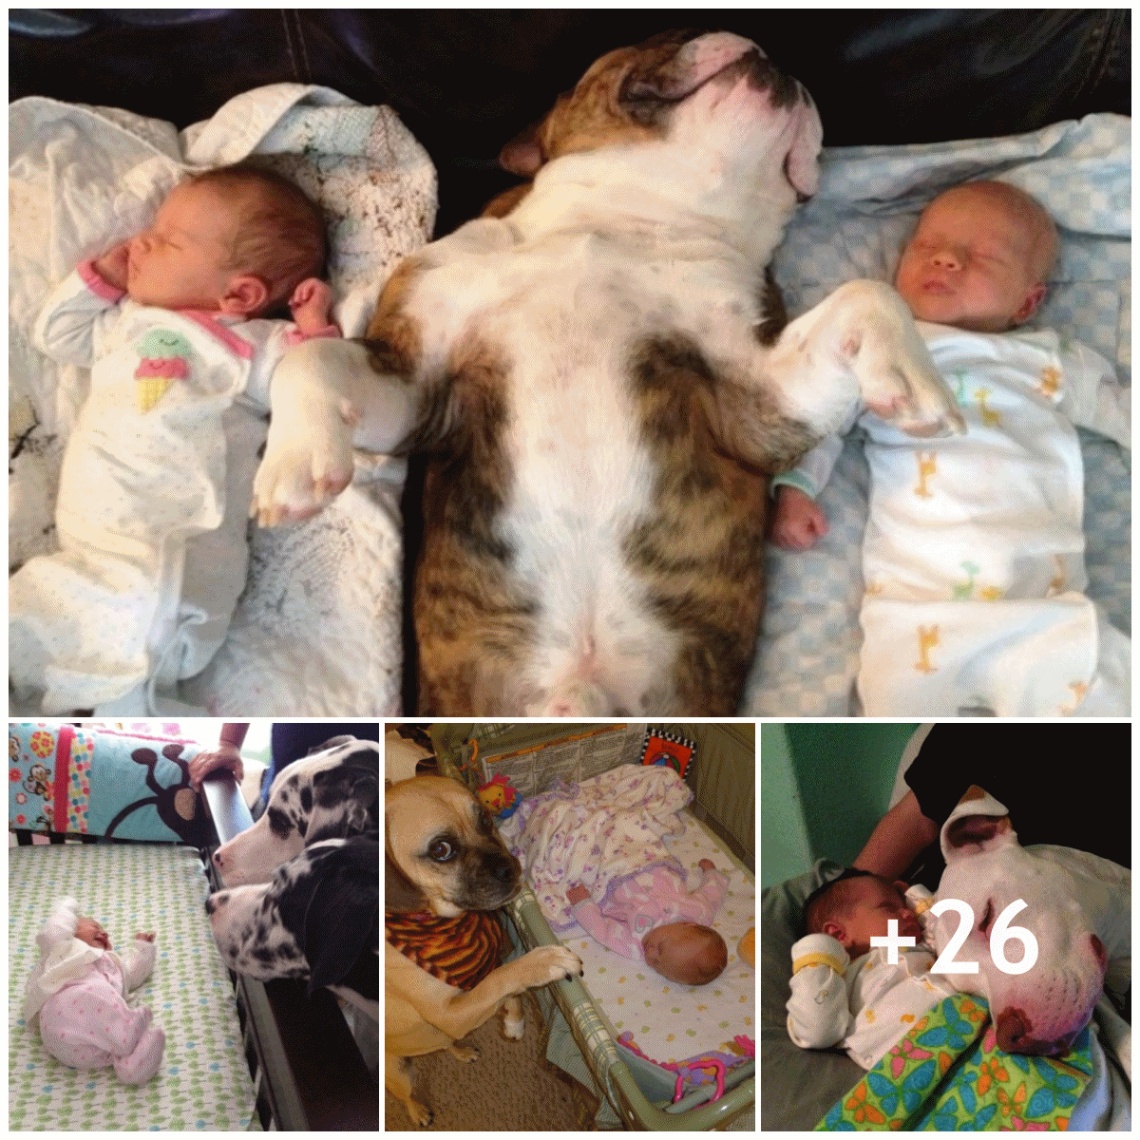 The dog welcomed the baby’s affection with great love and the happiest joy, always at his side to protect the baby.